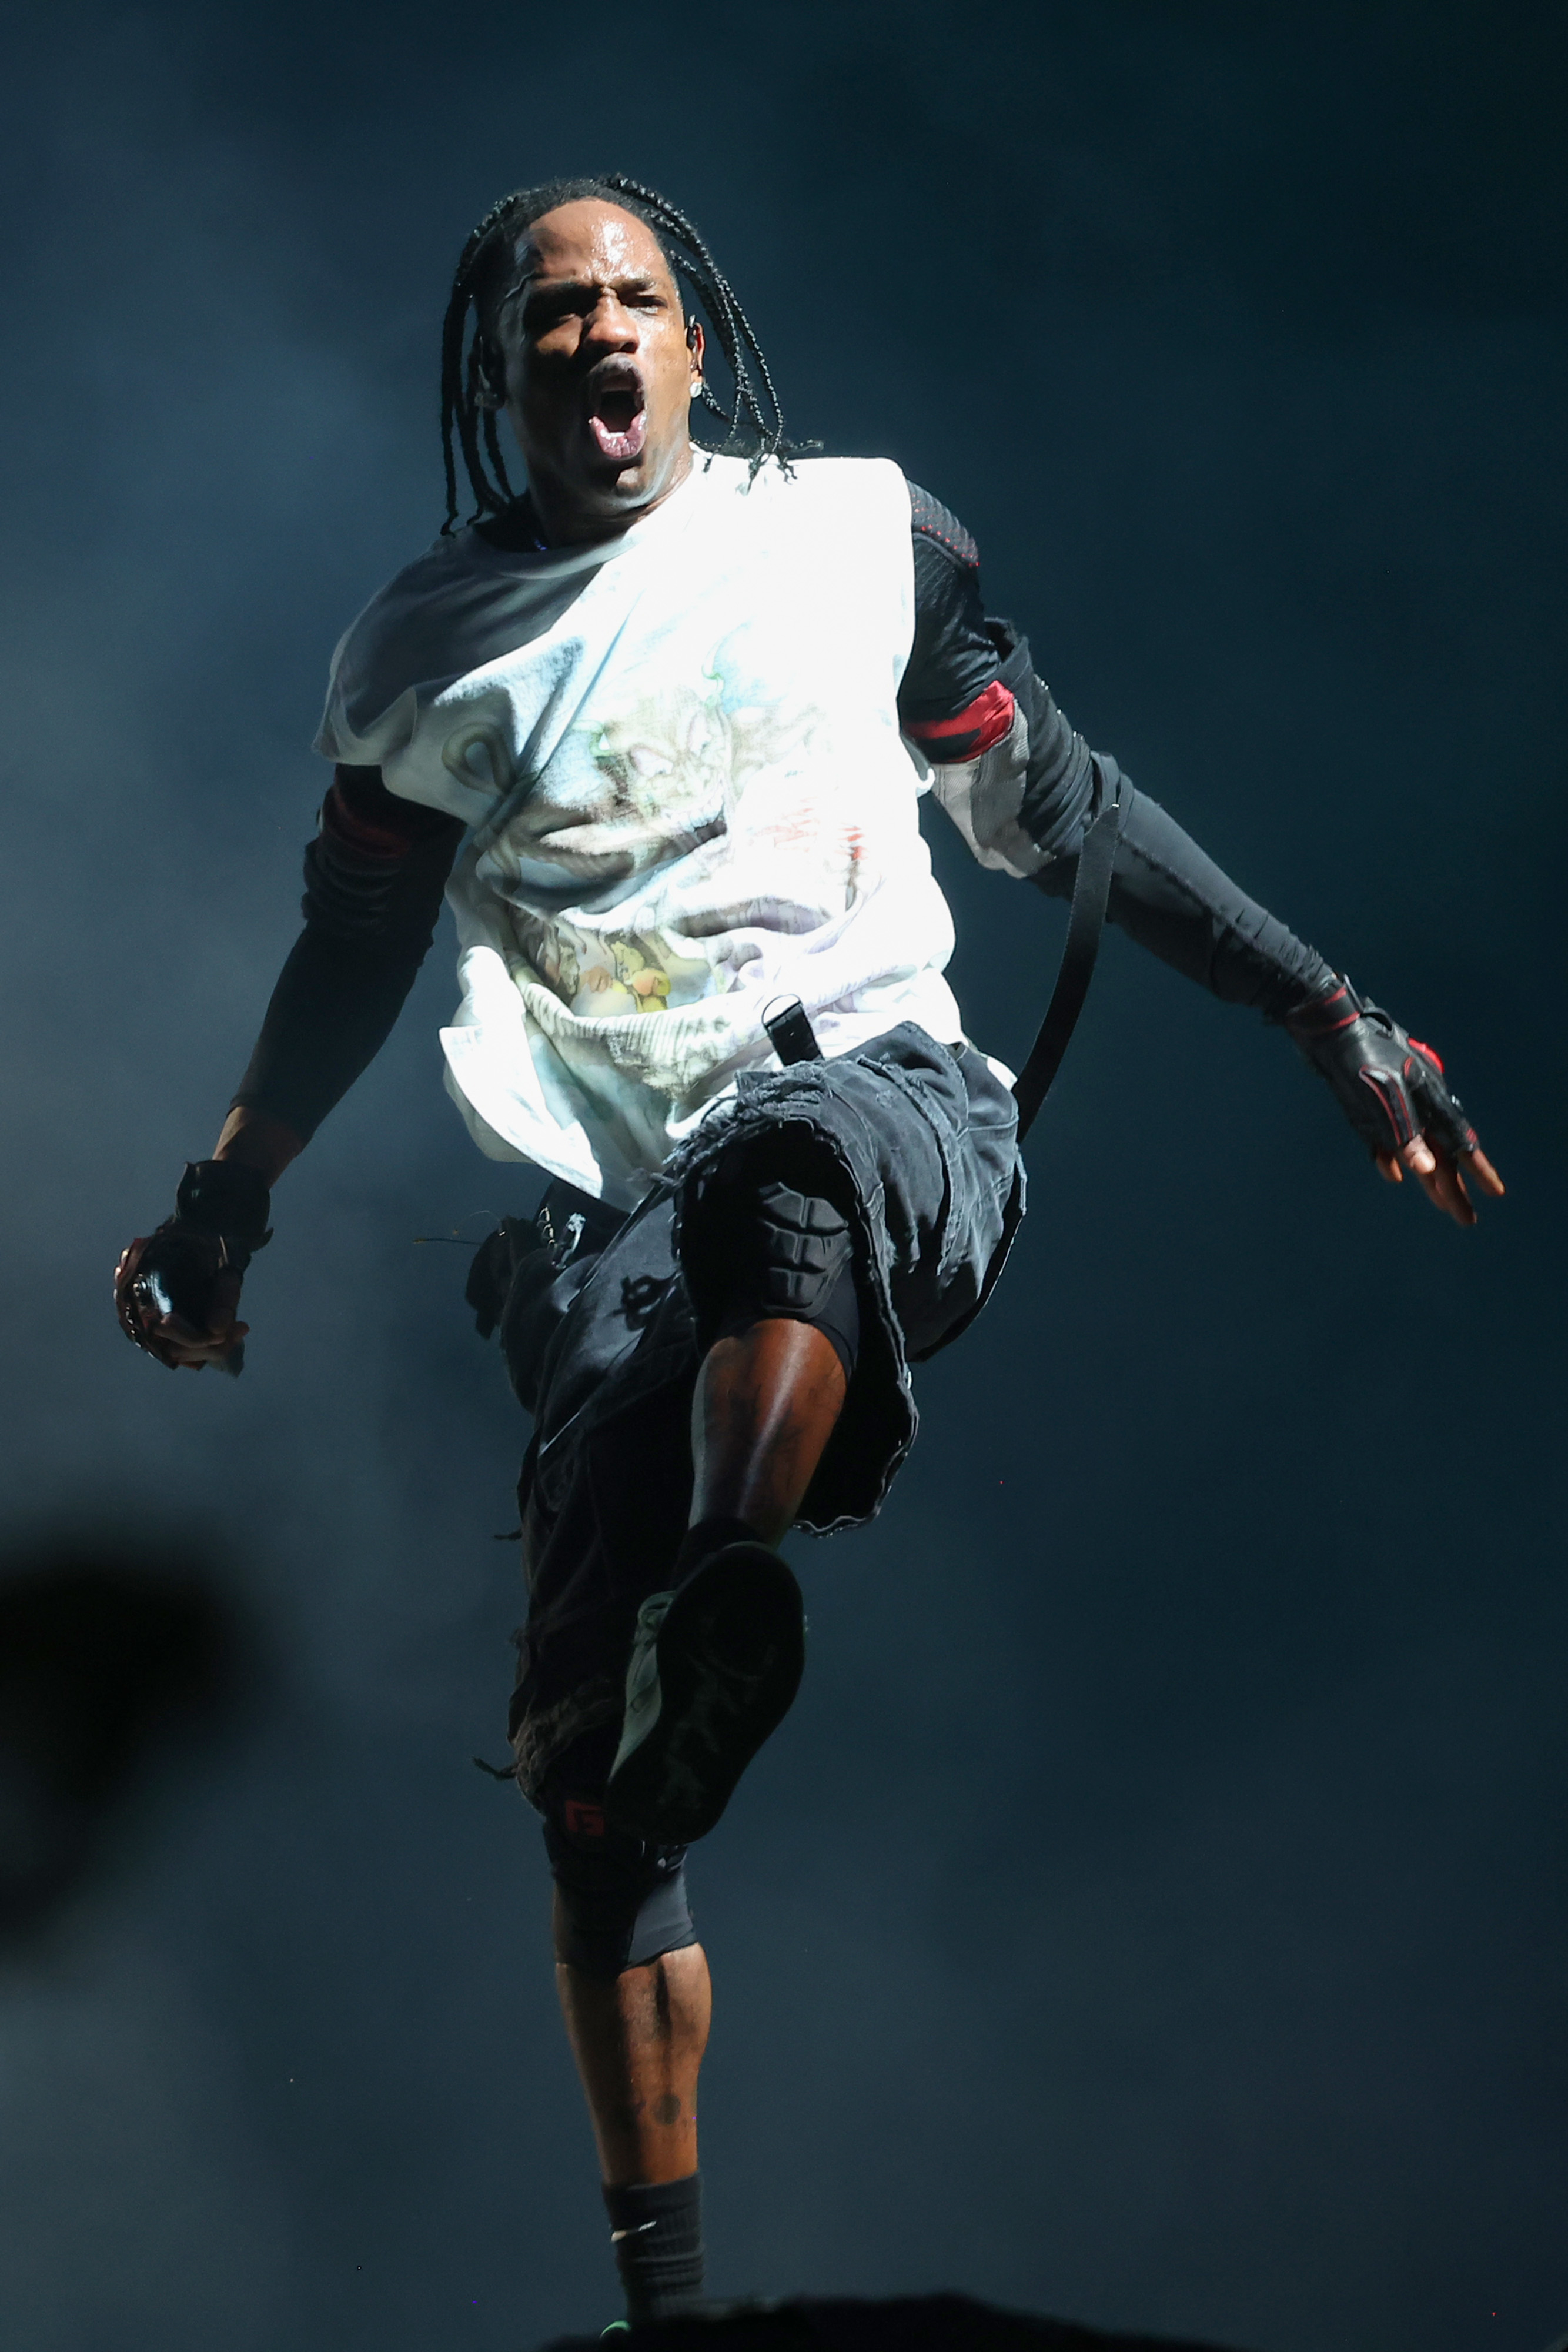 Travis jumping on stage